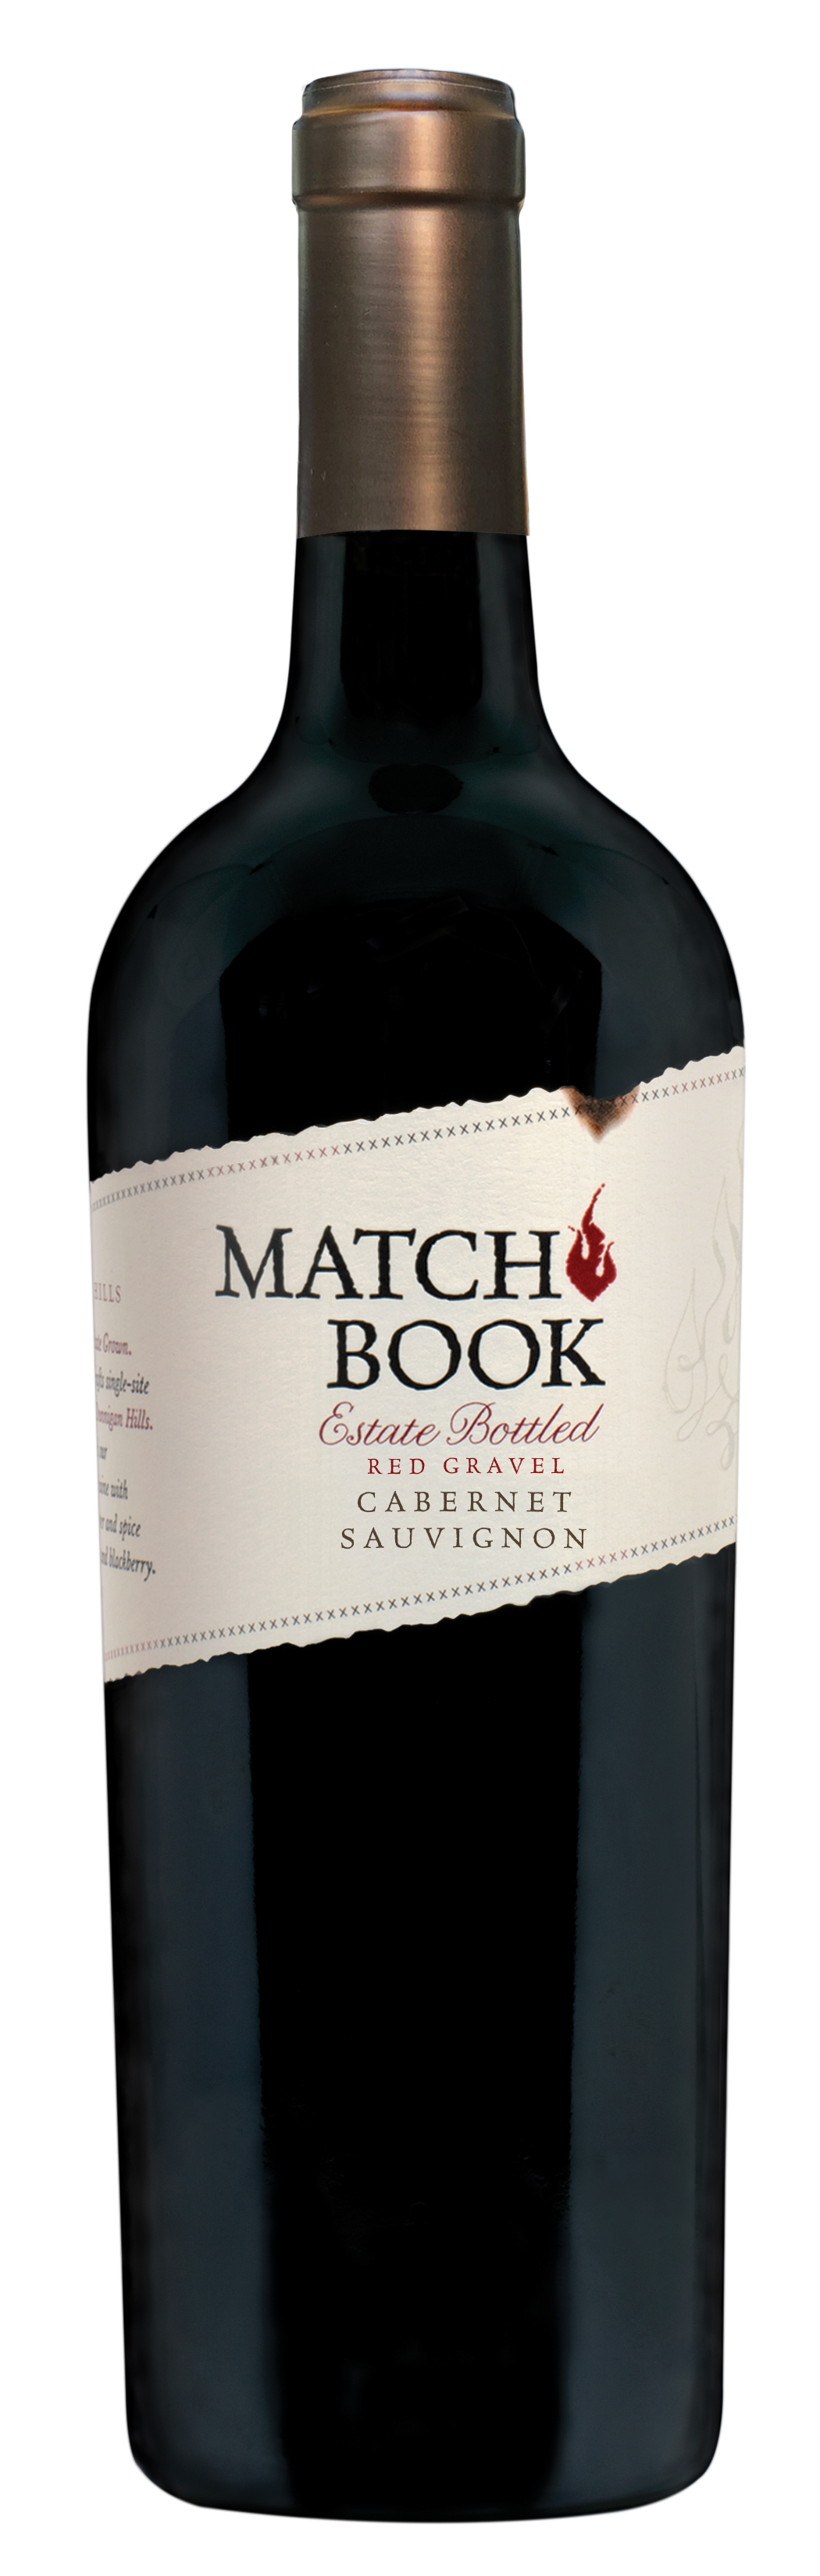 Product Image for 2020 Matchbook Red Gravel Cabernet Sauvignon